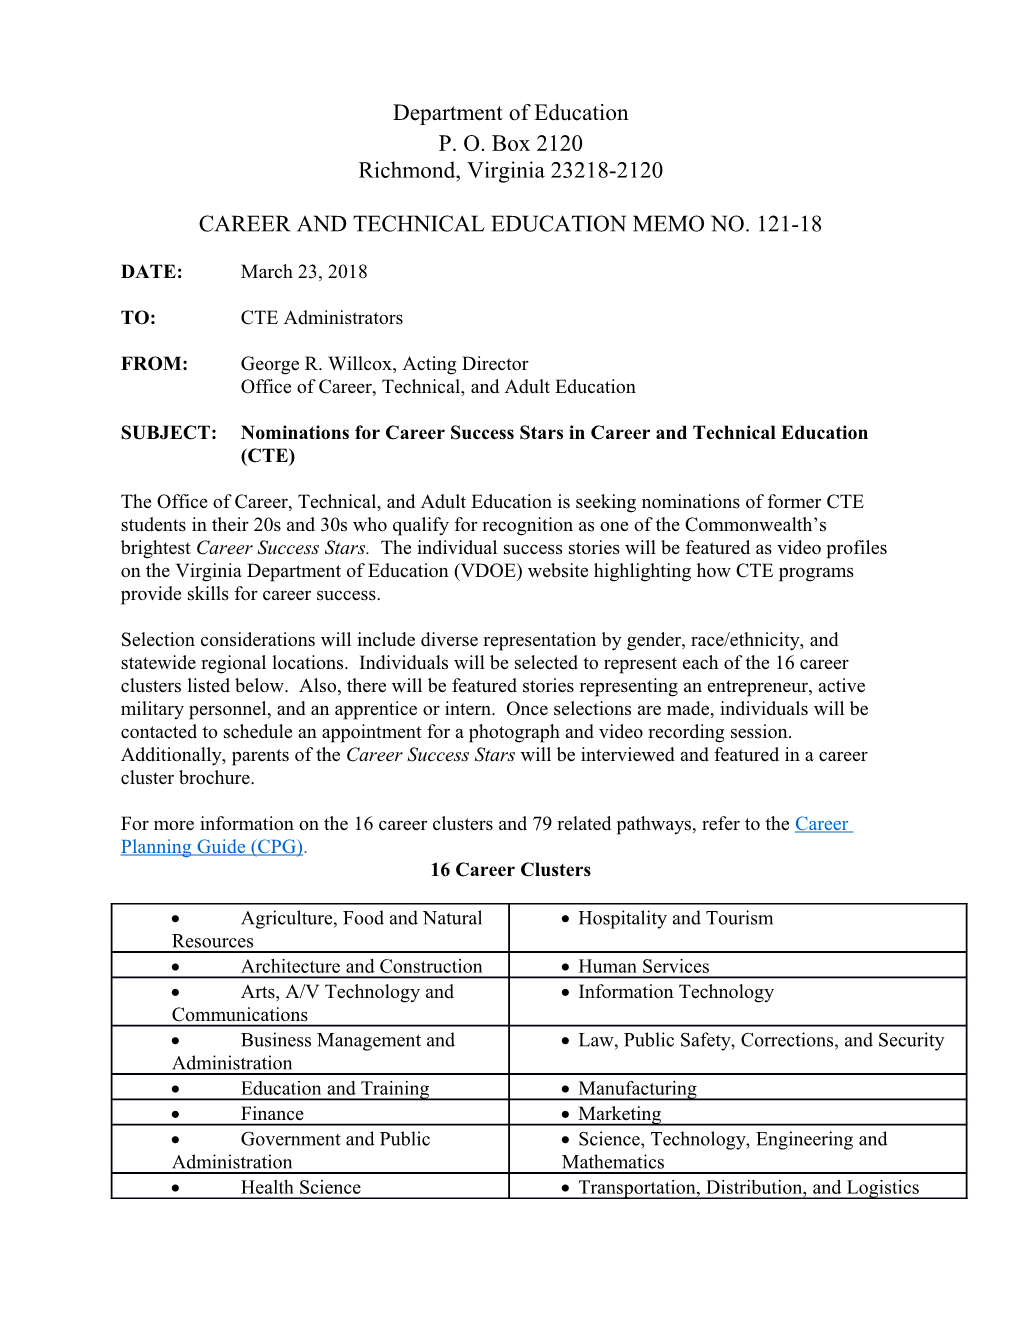 Career and Technical Education Memo No. 121-18